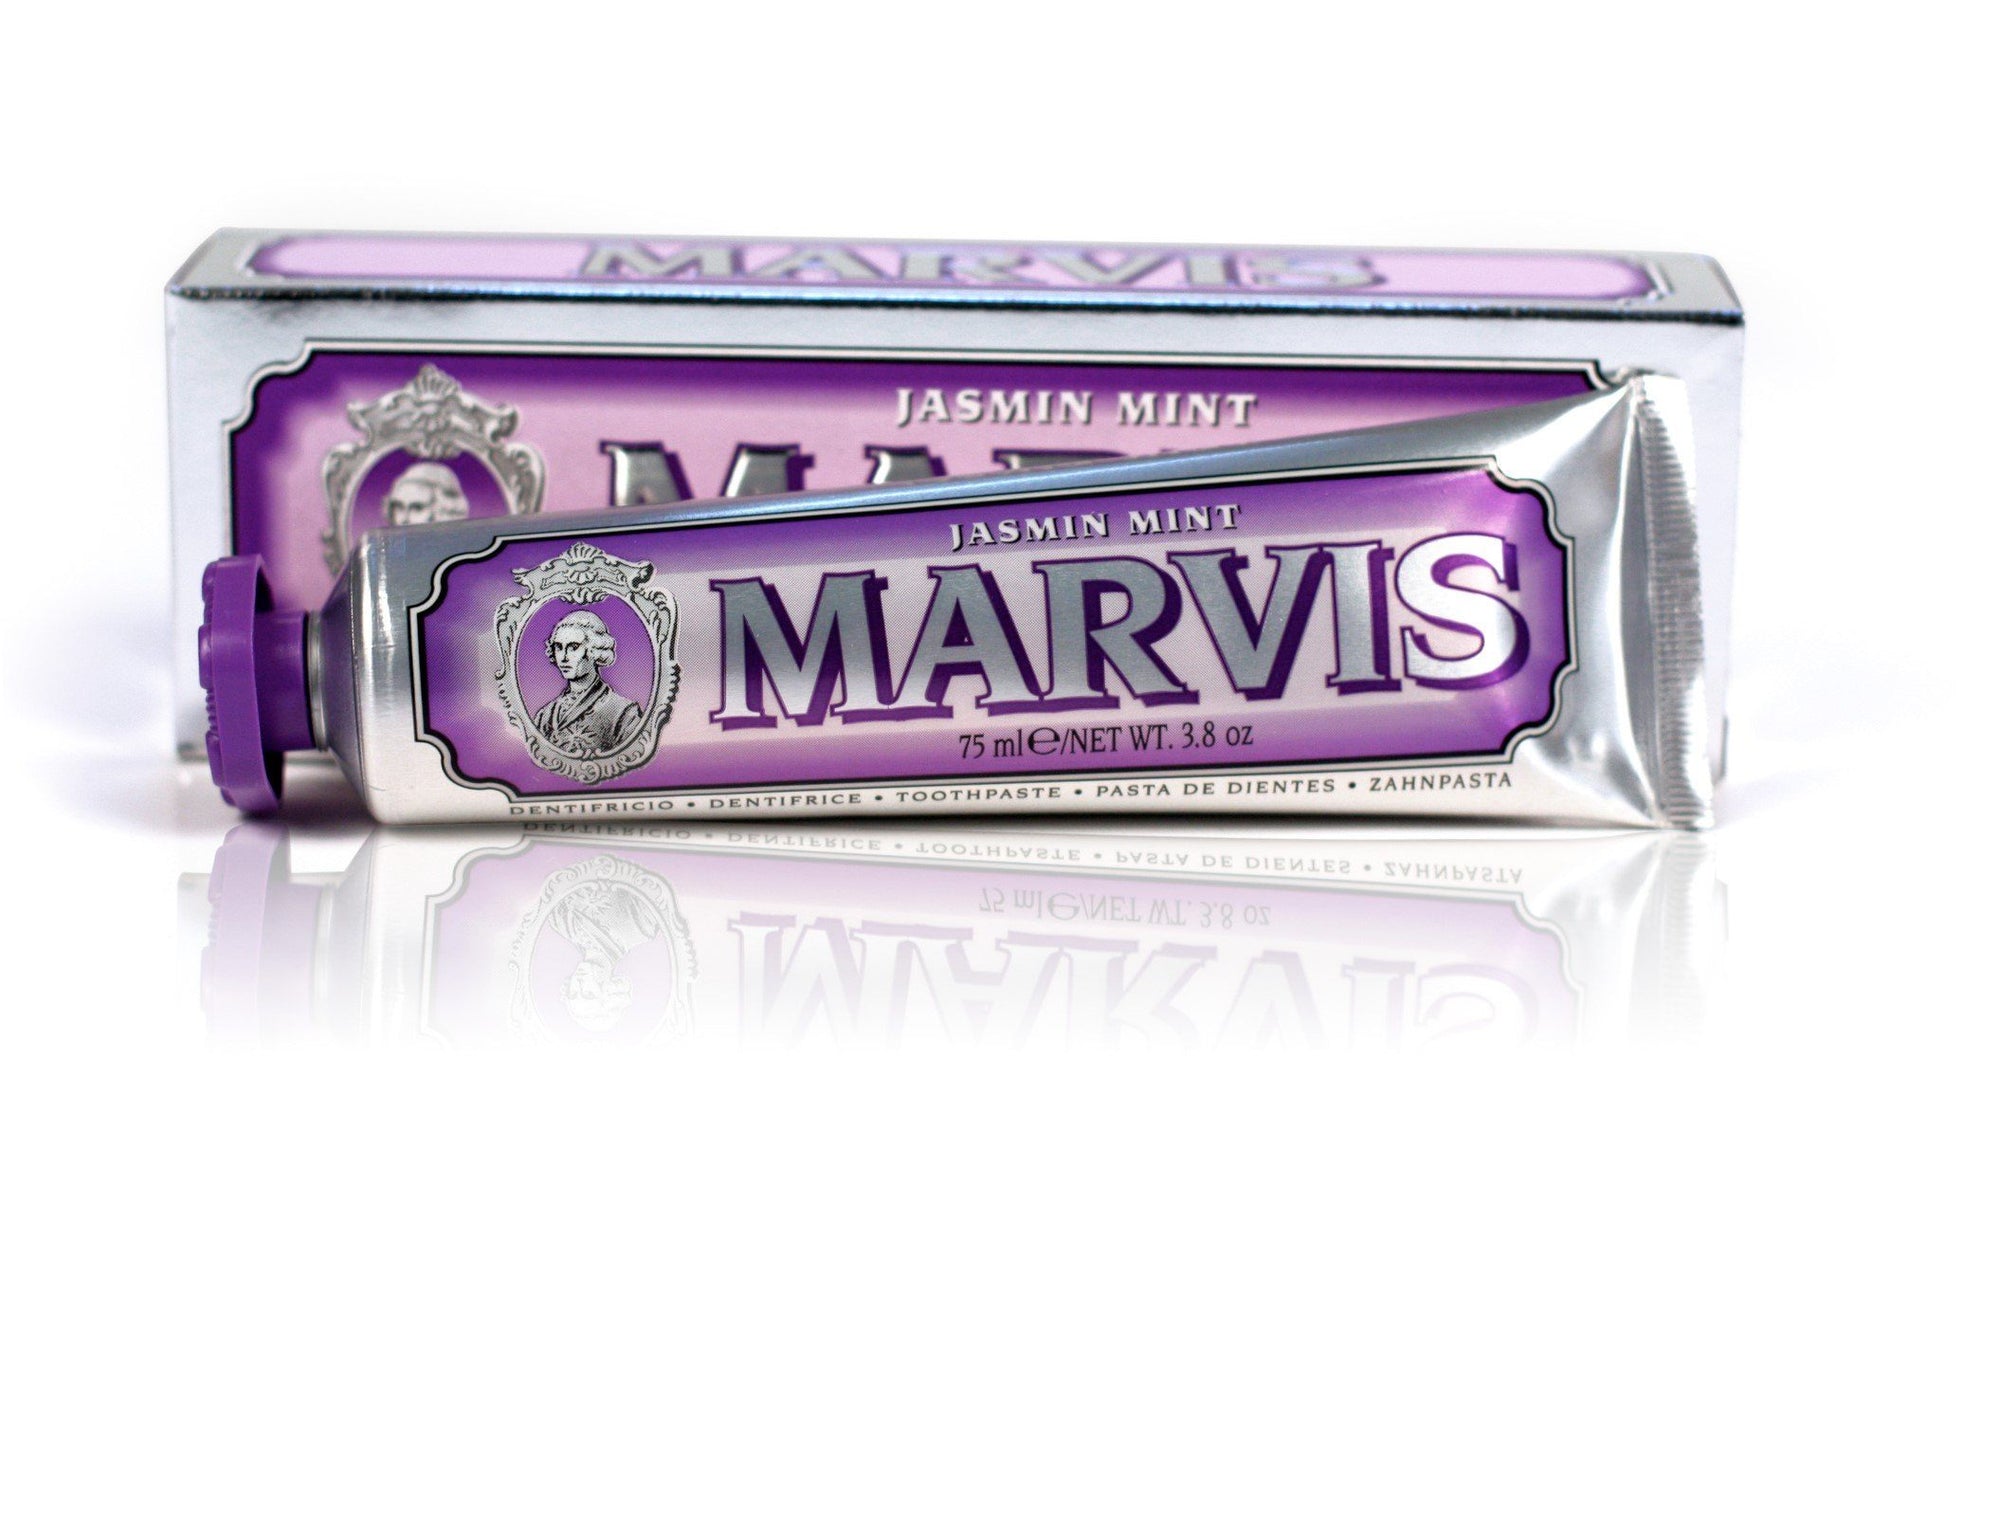 Marvis - Jasmine Mint Toothpaste - Soap & Water Everyday